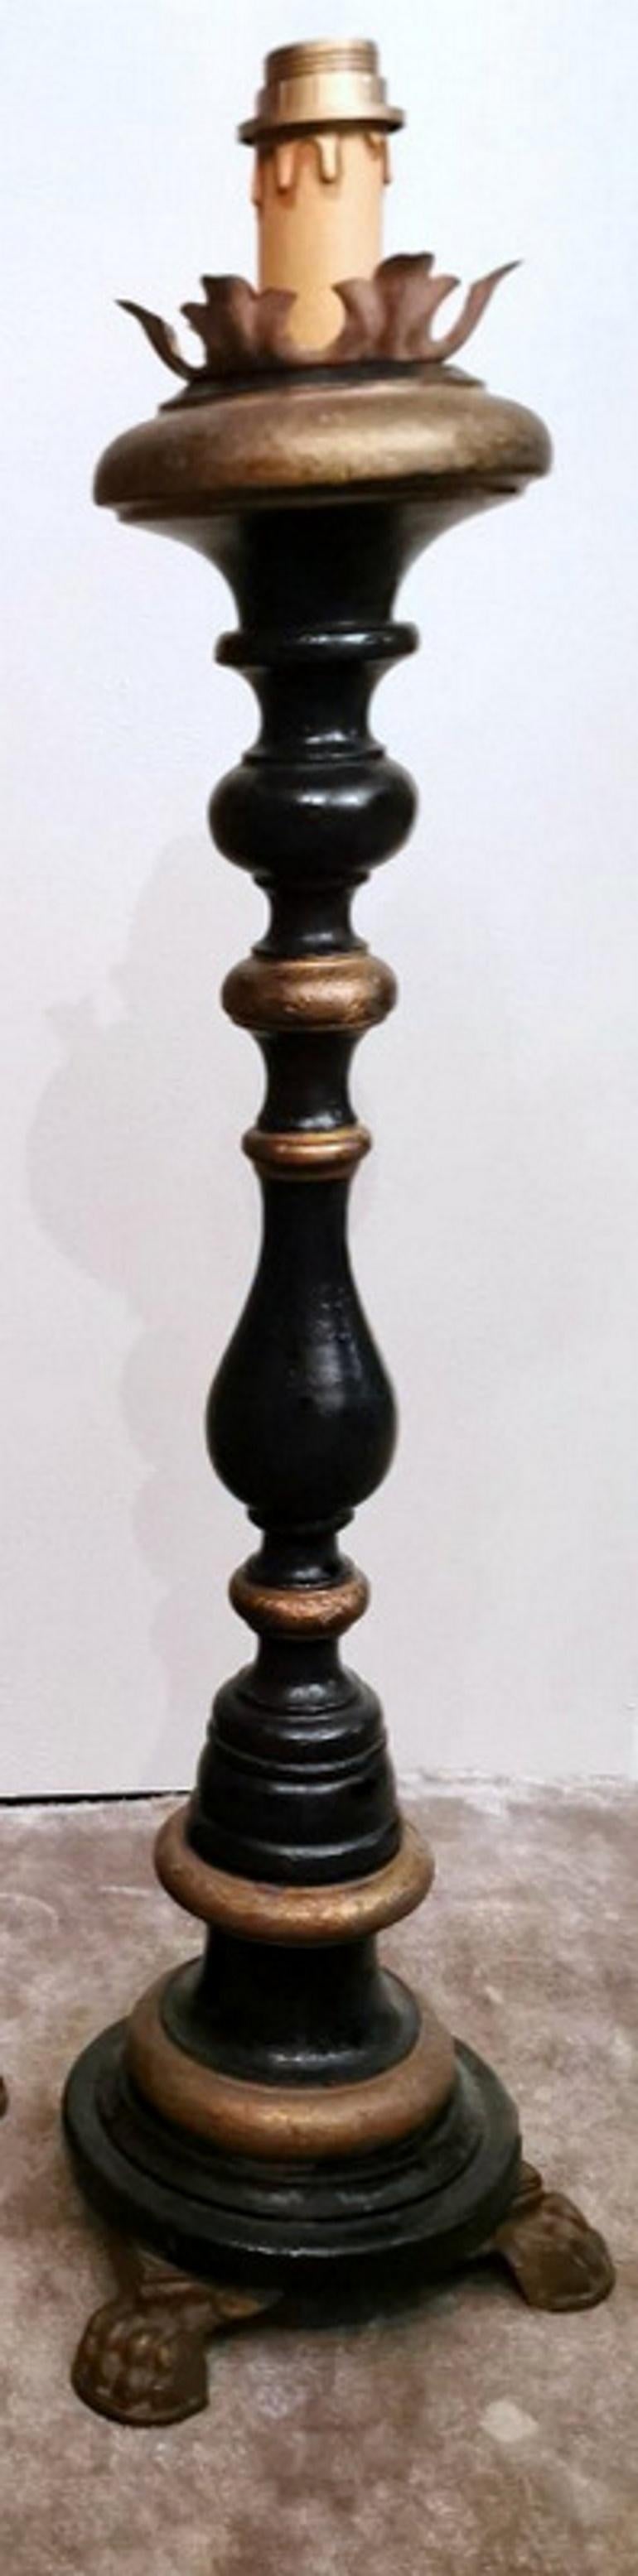 Forged Italian Black Lacquered Wood and Burnished Gold Church Candlesticks